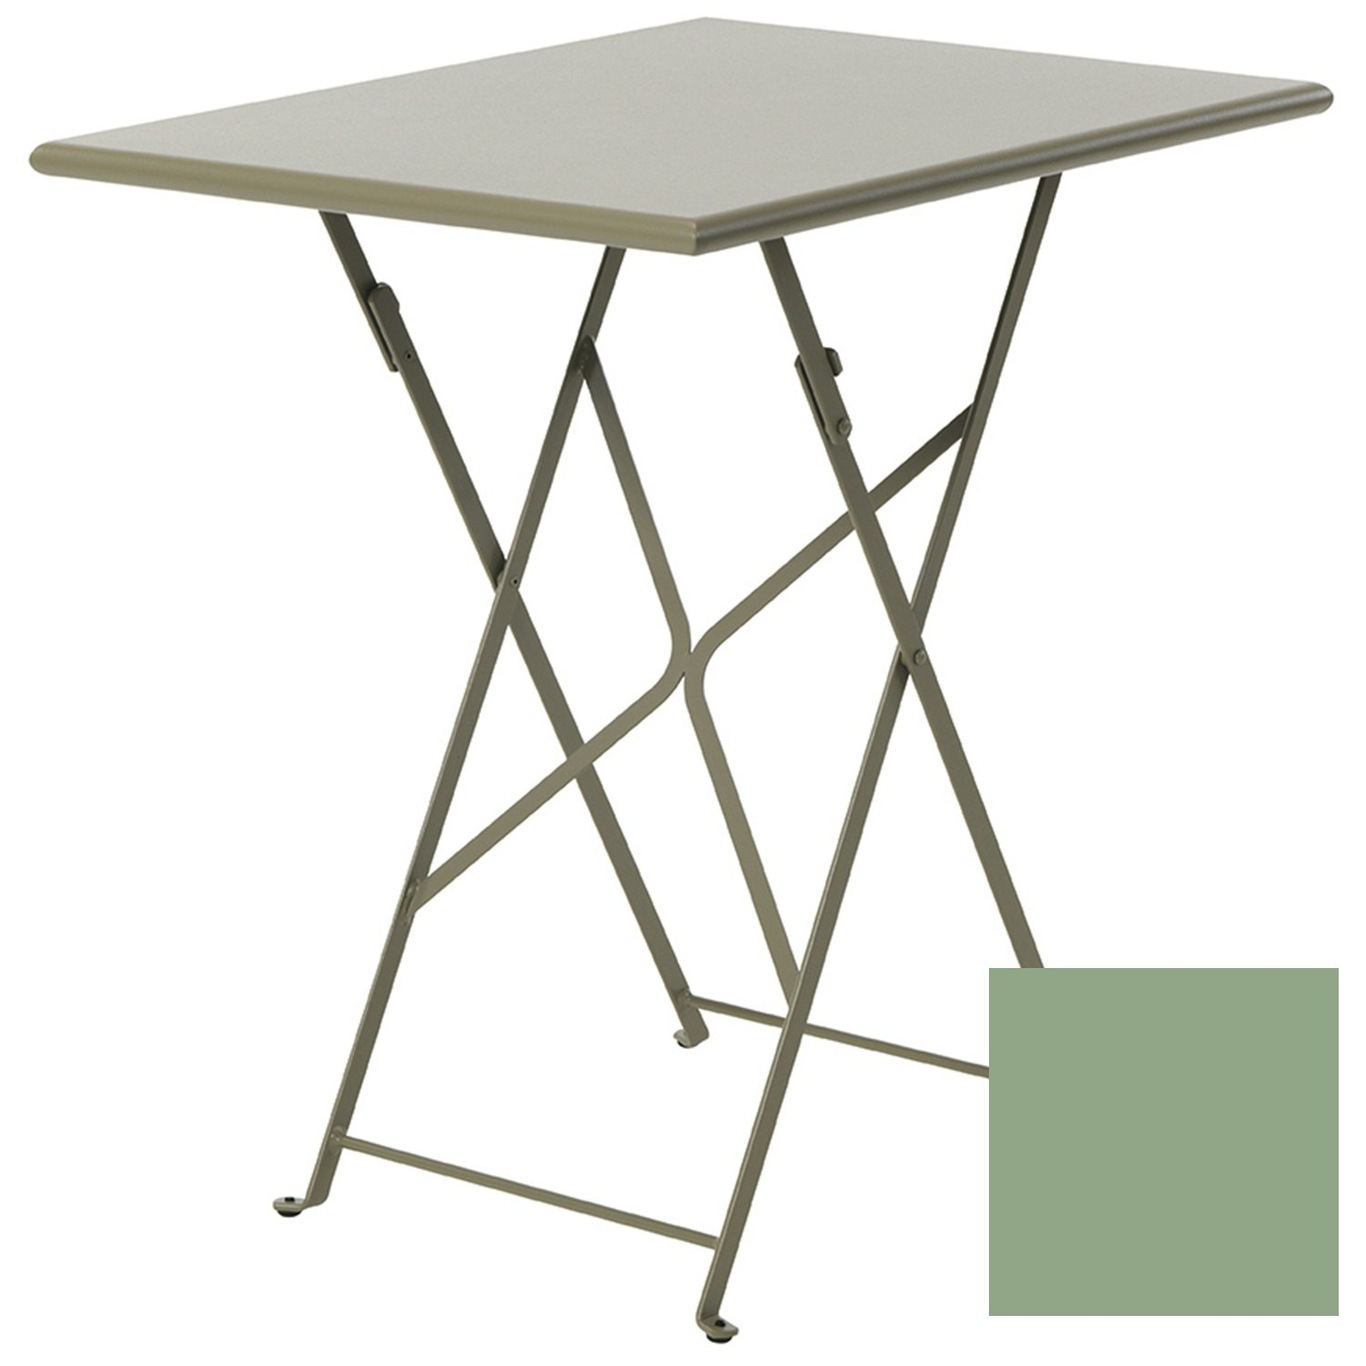 Flower Foldable Table 55x70 cm, Sage Green